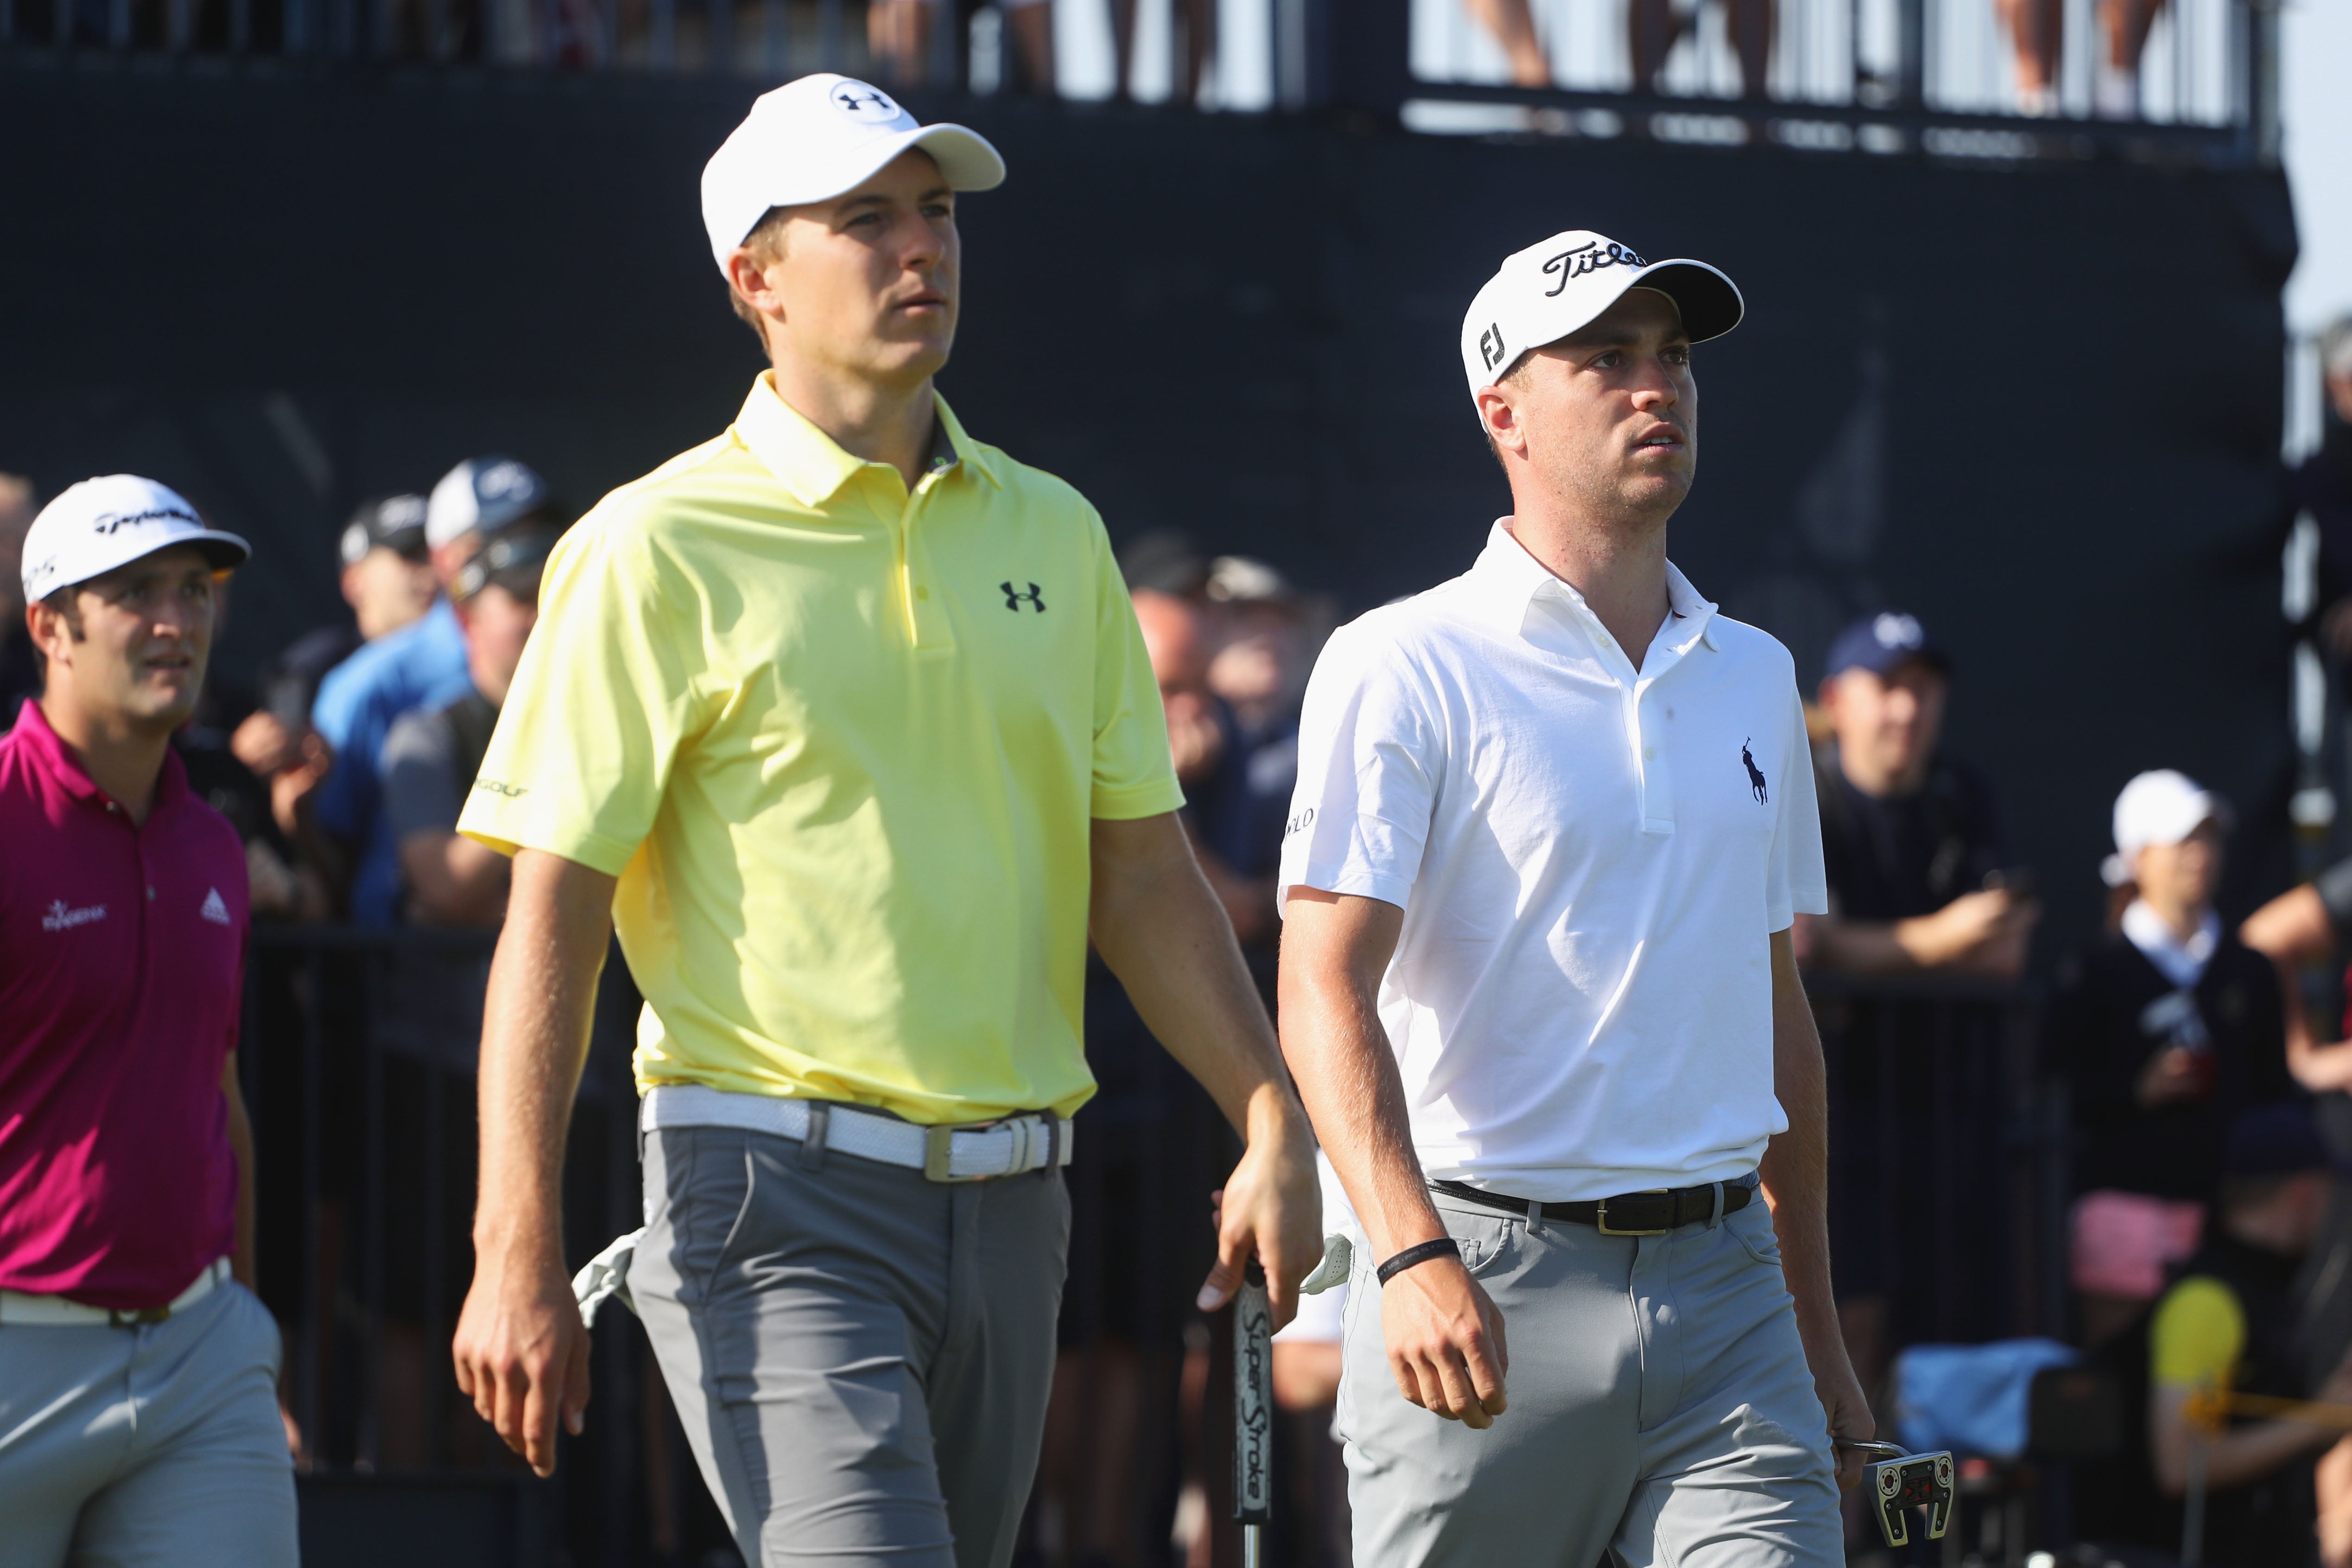 Jealousy over Spieth's major wins propelled Justin Thomas to victory at PGA